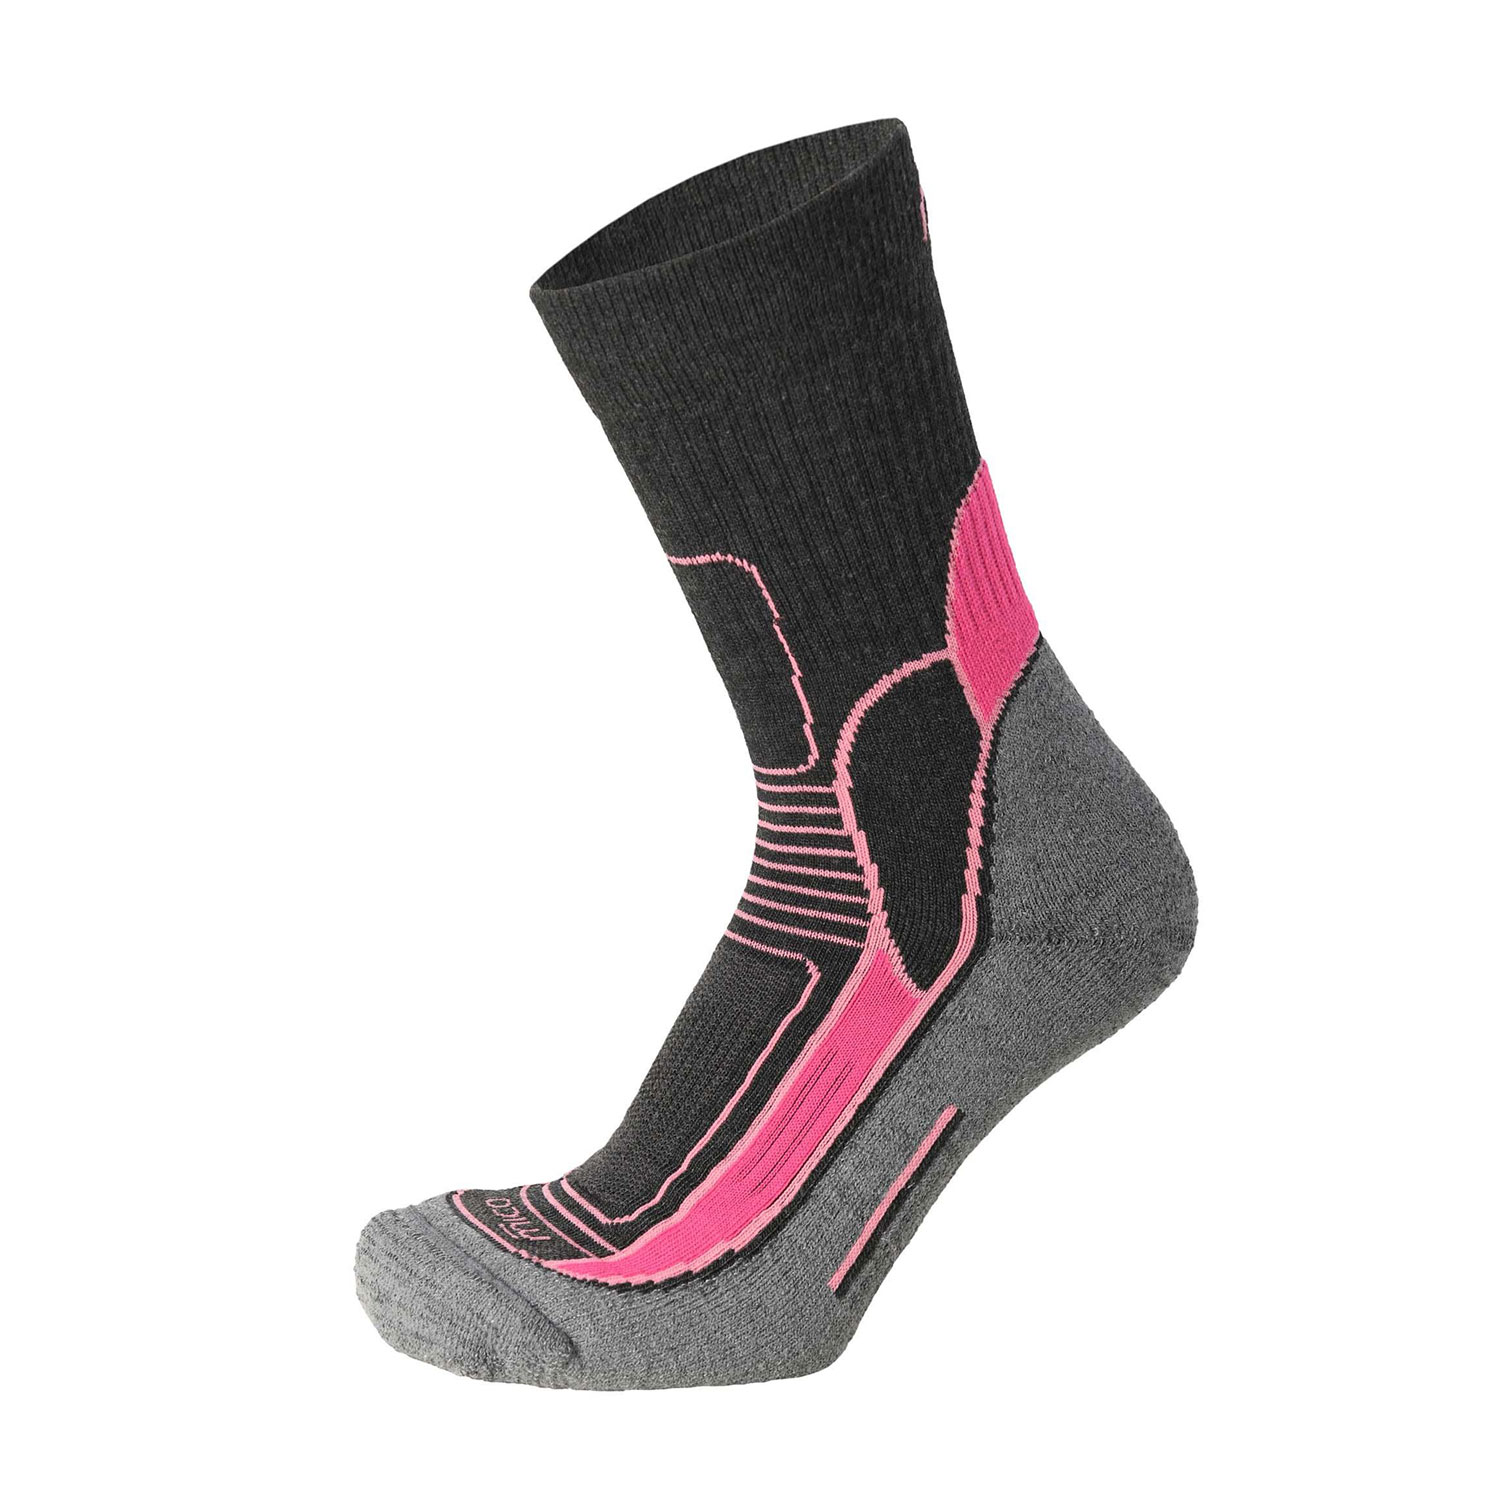 Mico Extra Dry Calcetines de Hiking Mujer - Antracite Melange